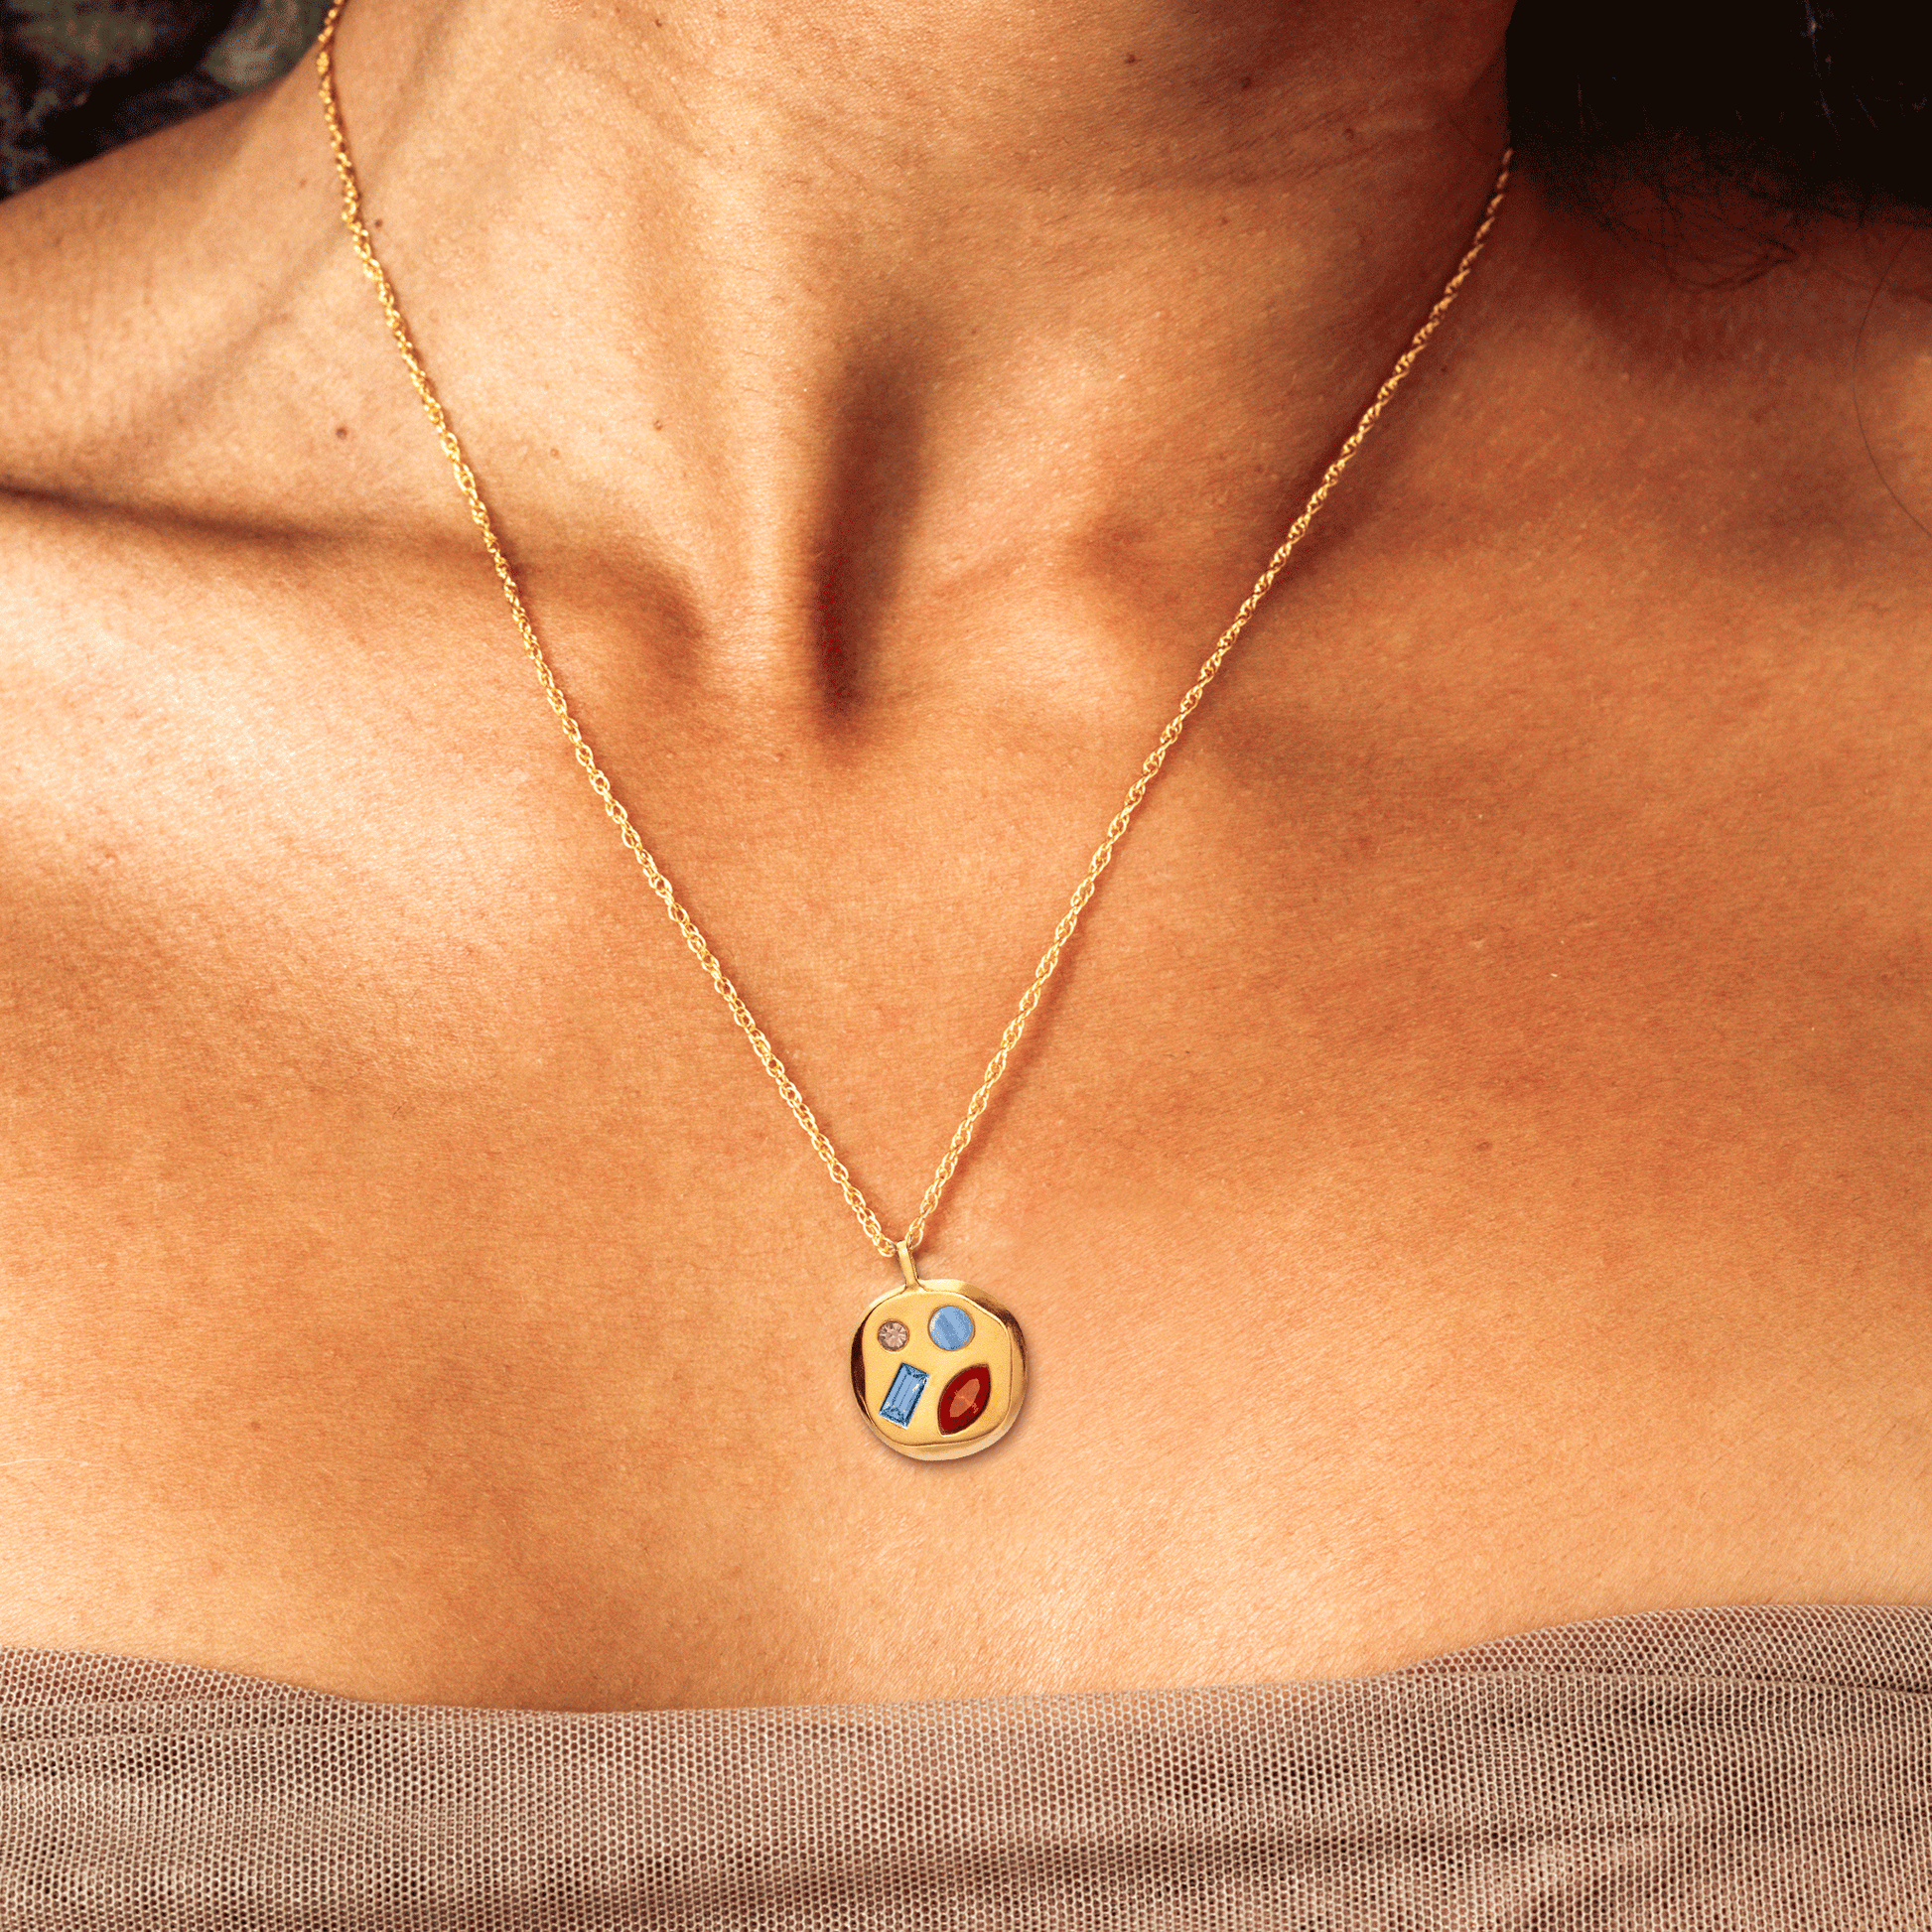 Person wearing The July Seventh Pendant